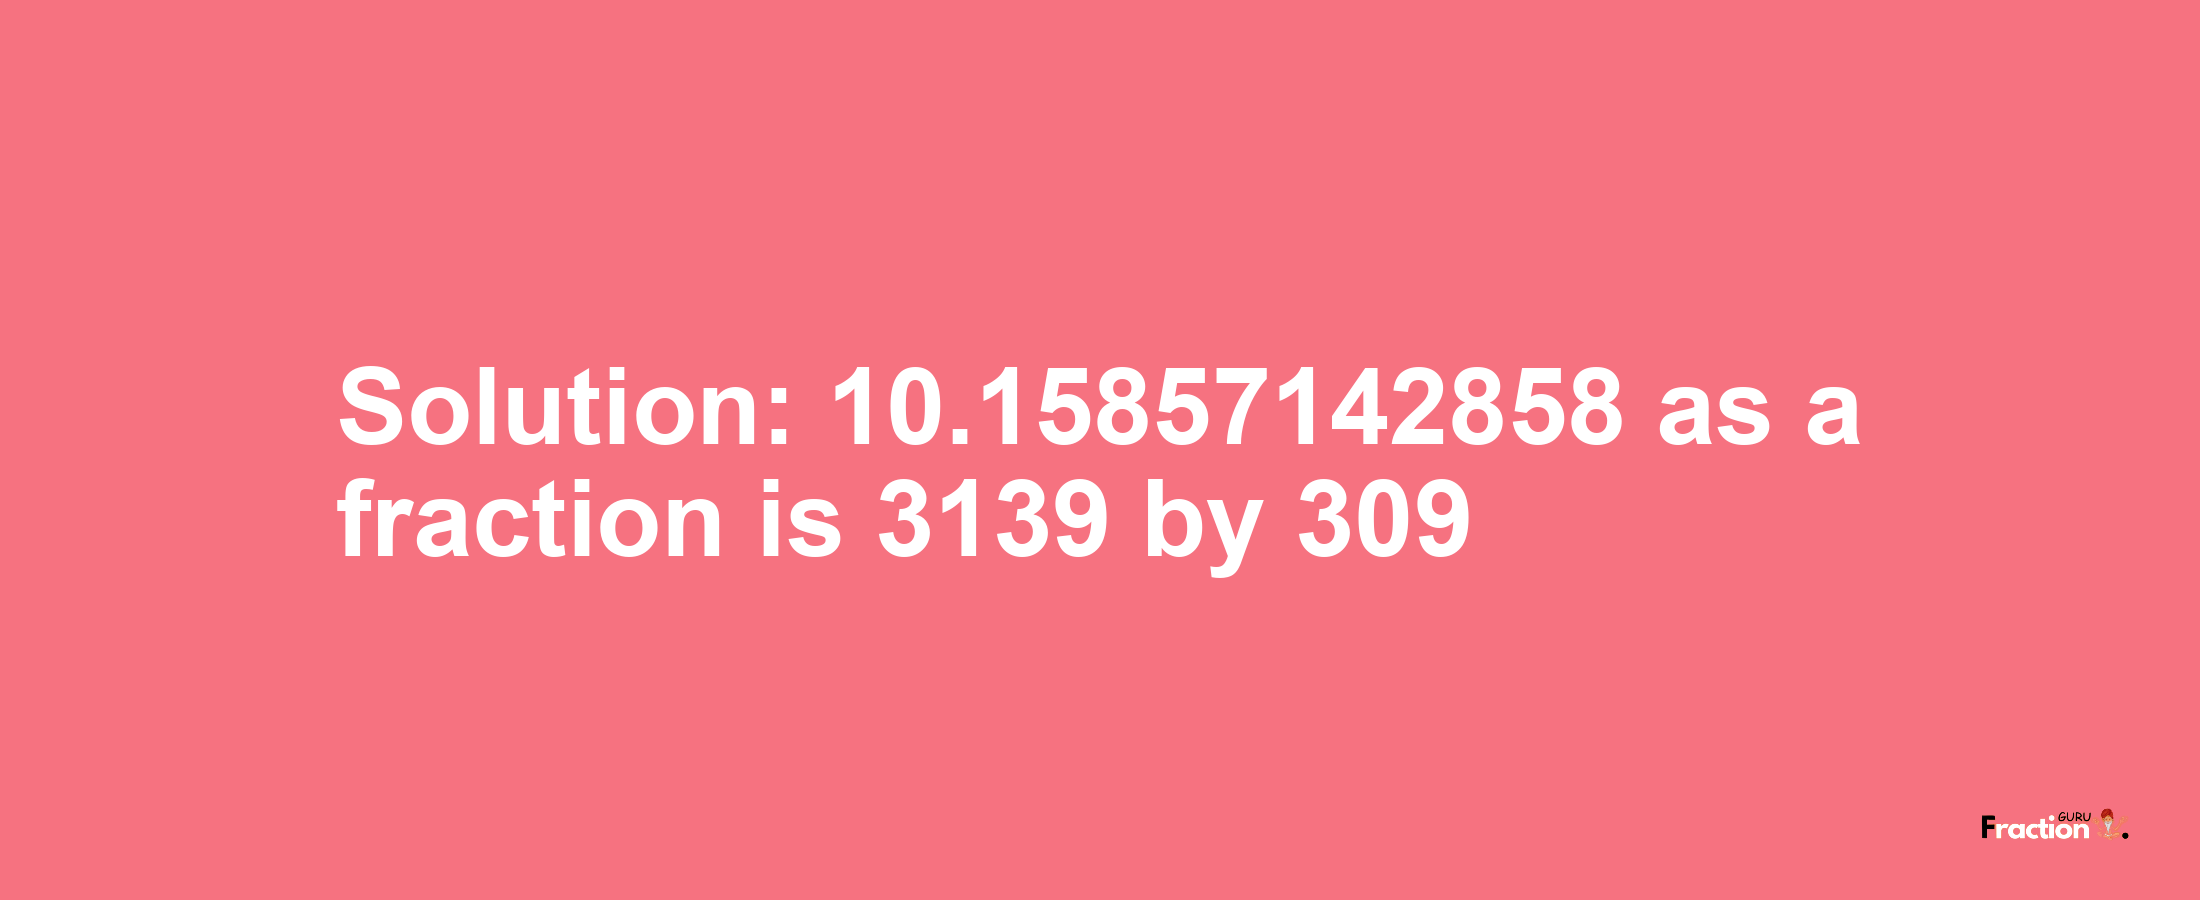 Solution:10.15857142858 as a fraction is 3139/309